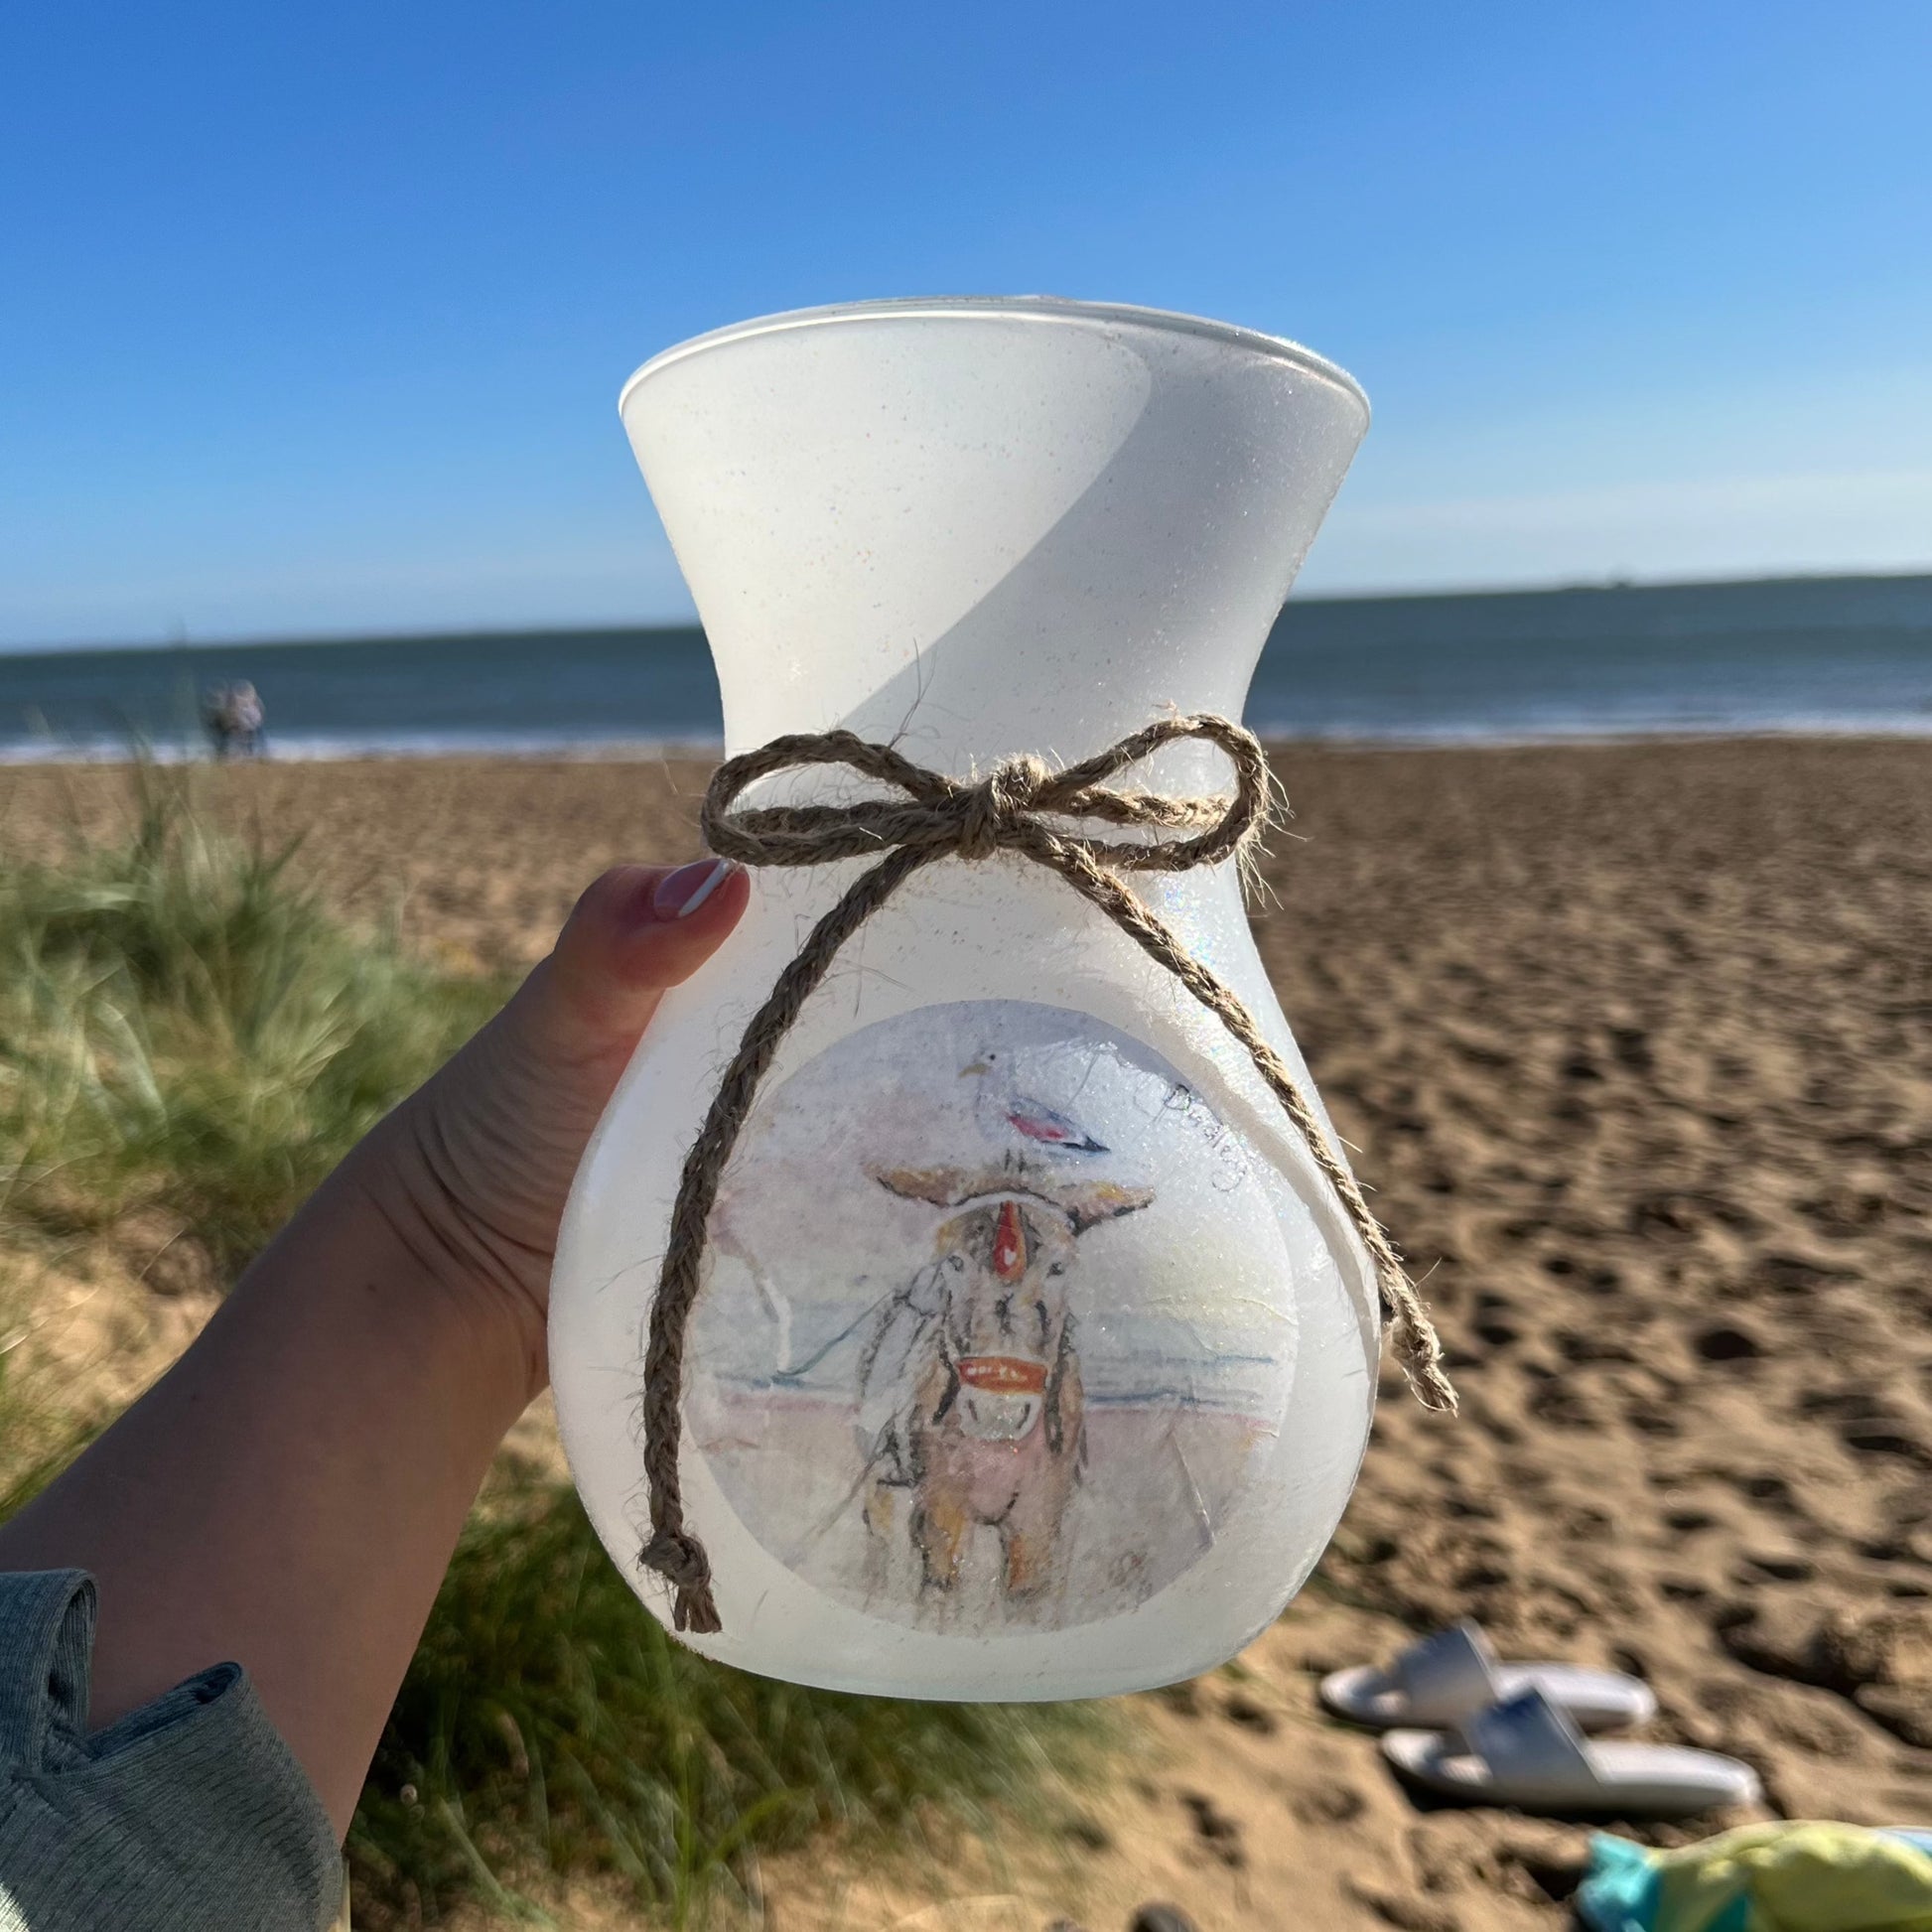 A decoupaged vase on Cleethorpes beach, featuring watercolour artwork of Dudley the Donkey by Eve Leoni Smith and Jollypotz.